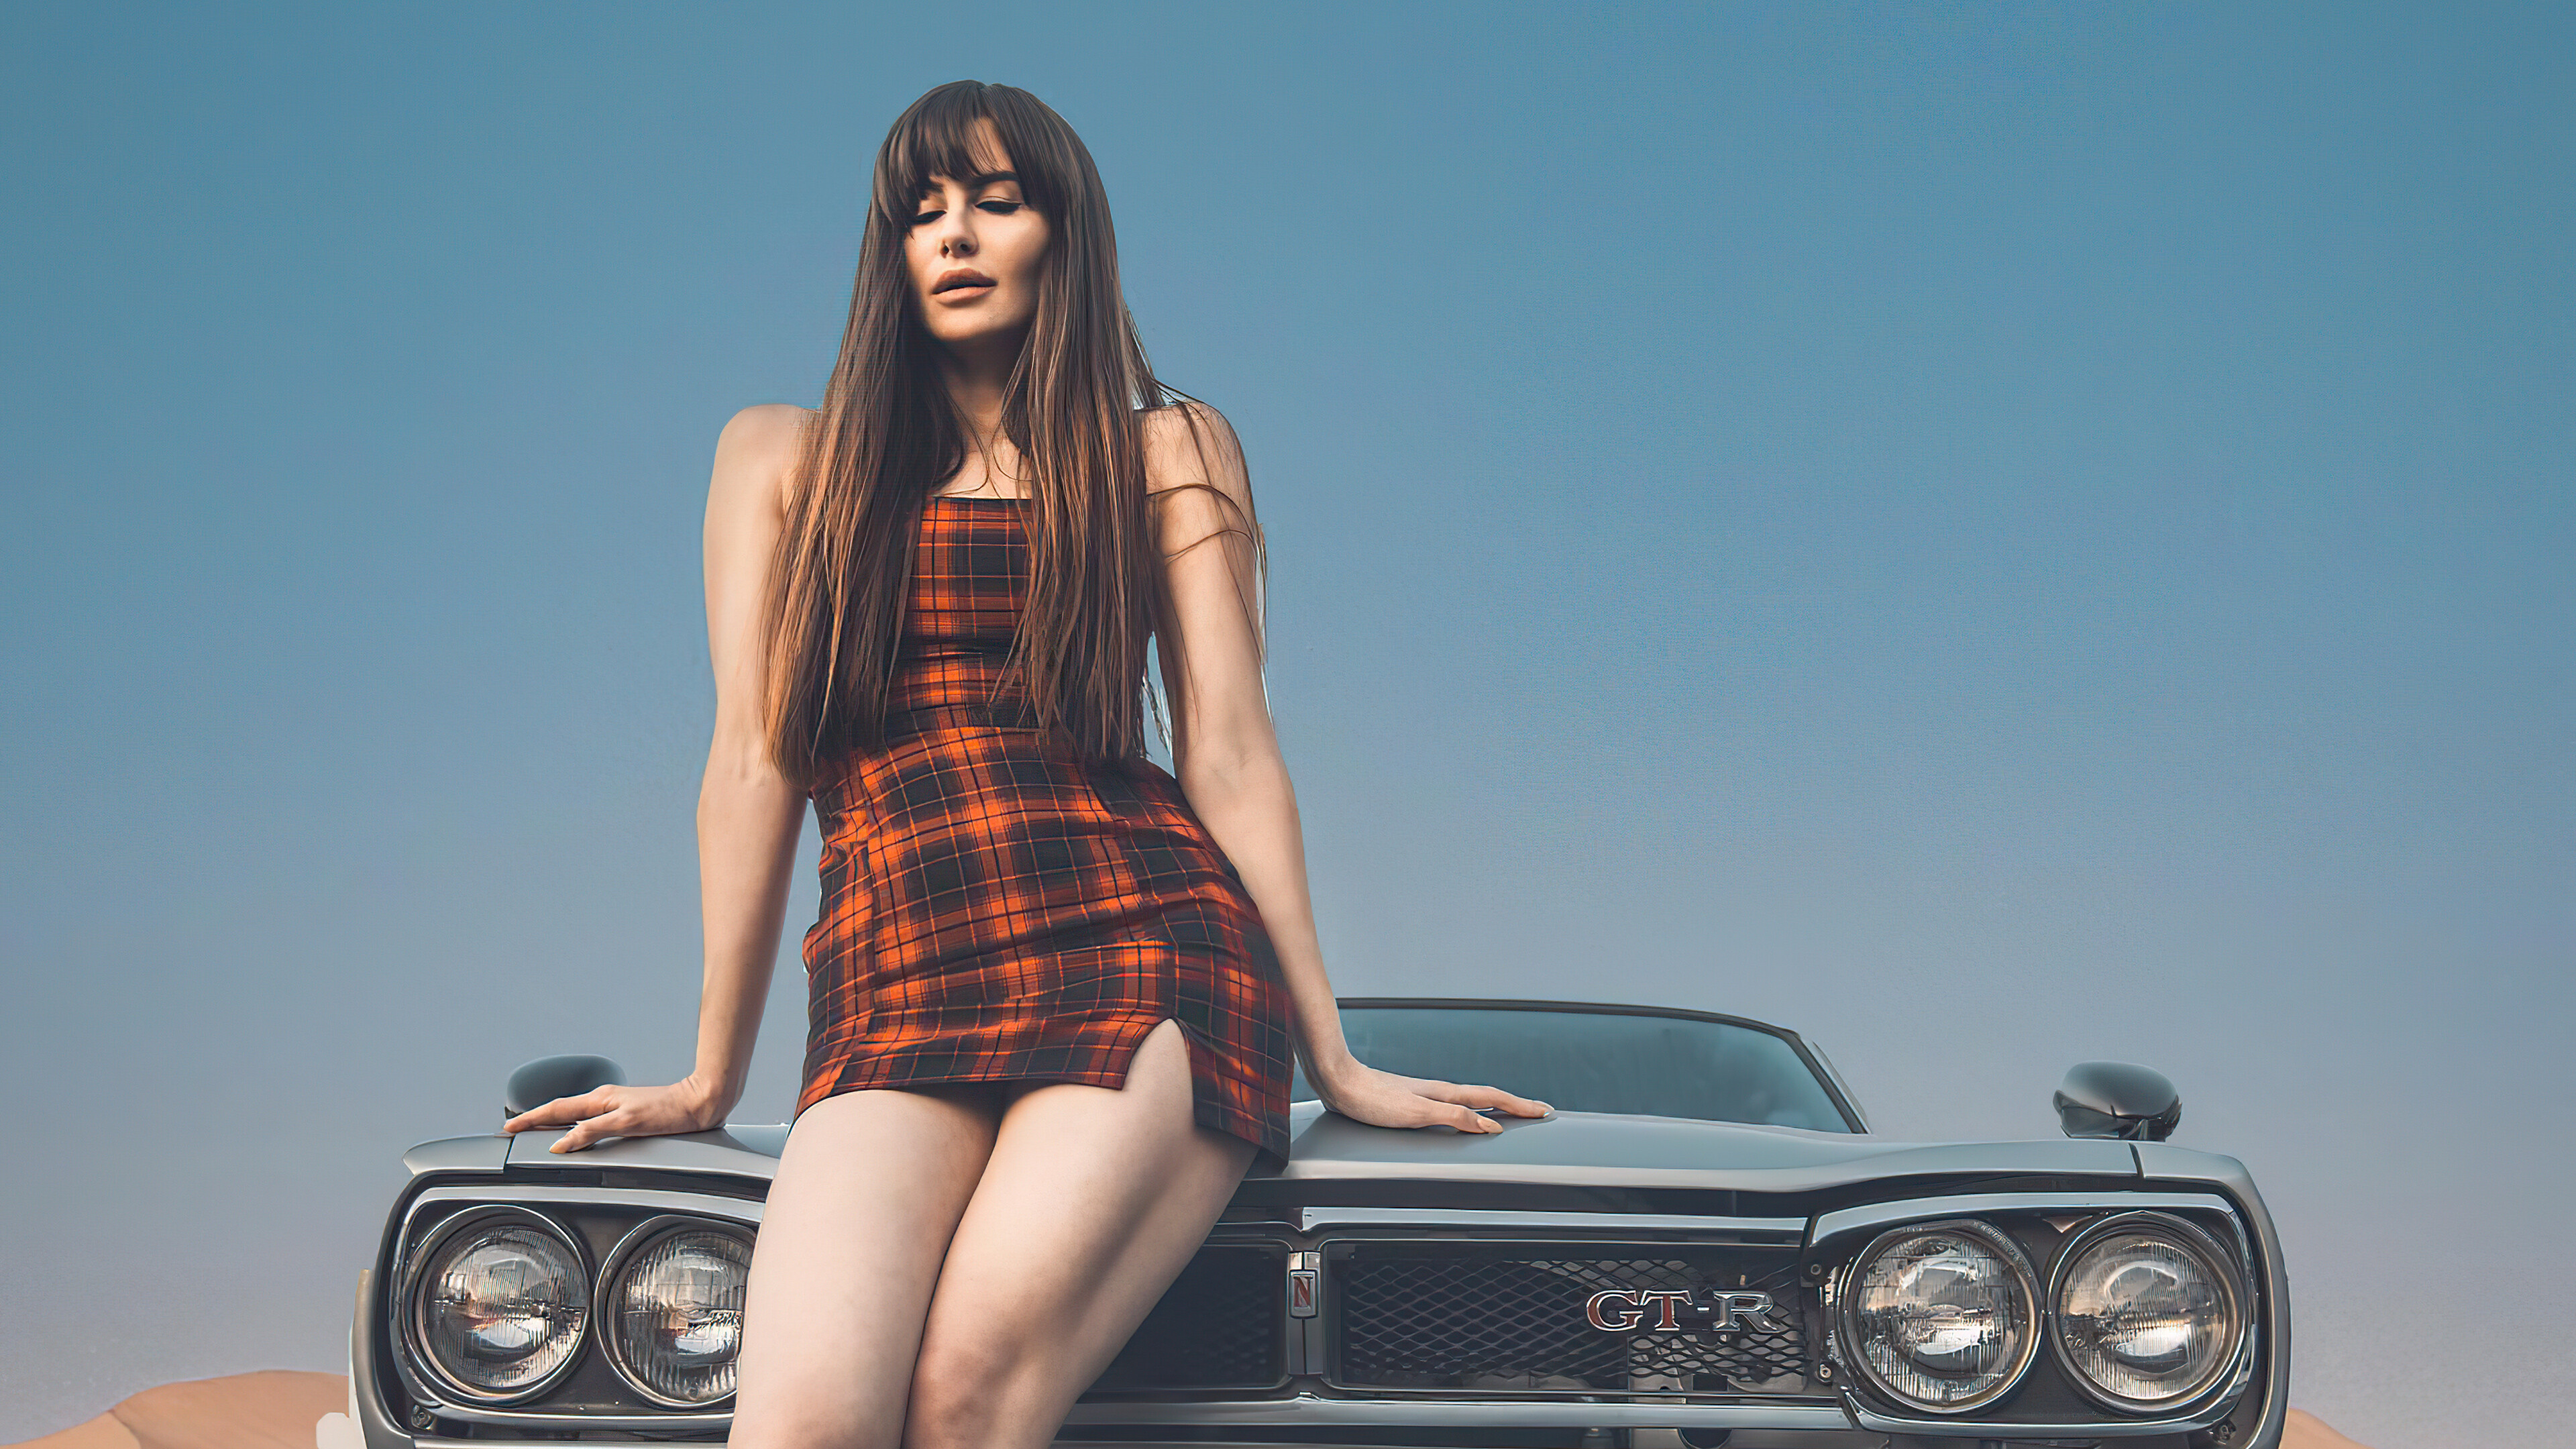 Girls and Muscle Cars Wallpaper: 4K, HD, 1920x1080 Phone & Desktop Background